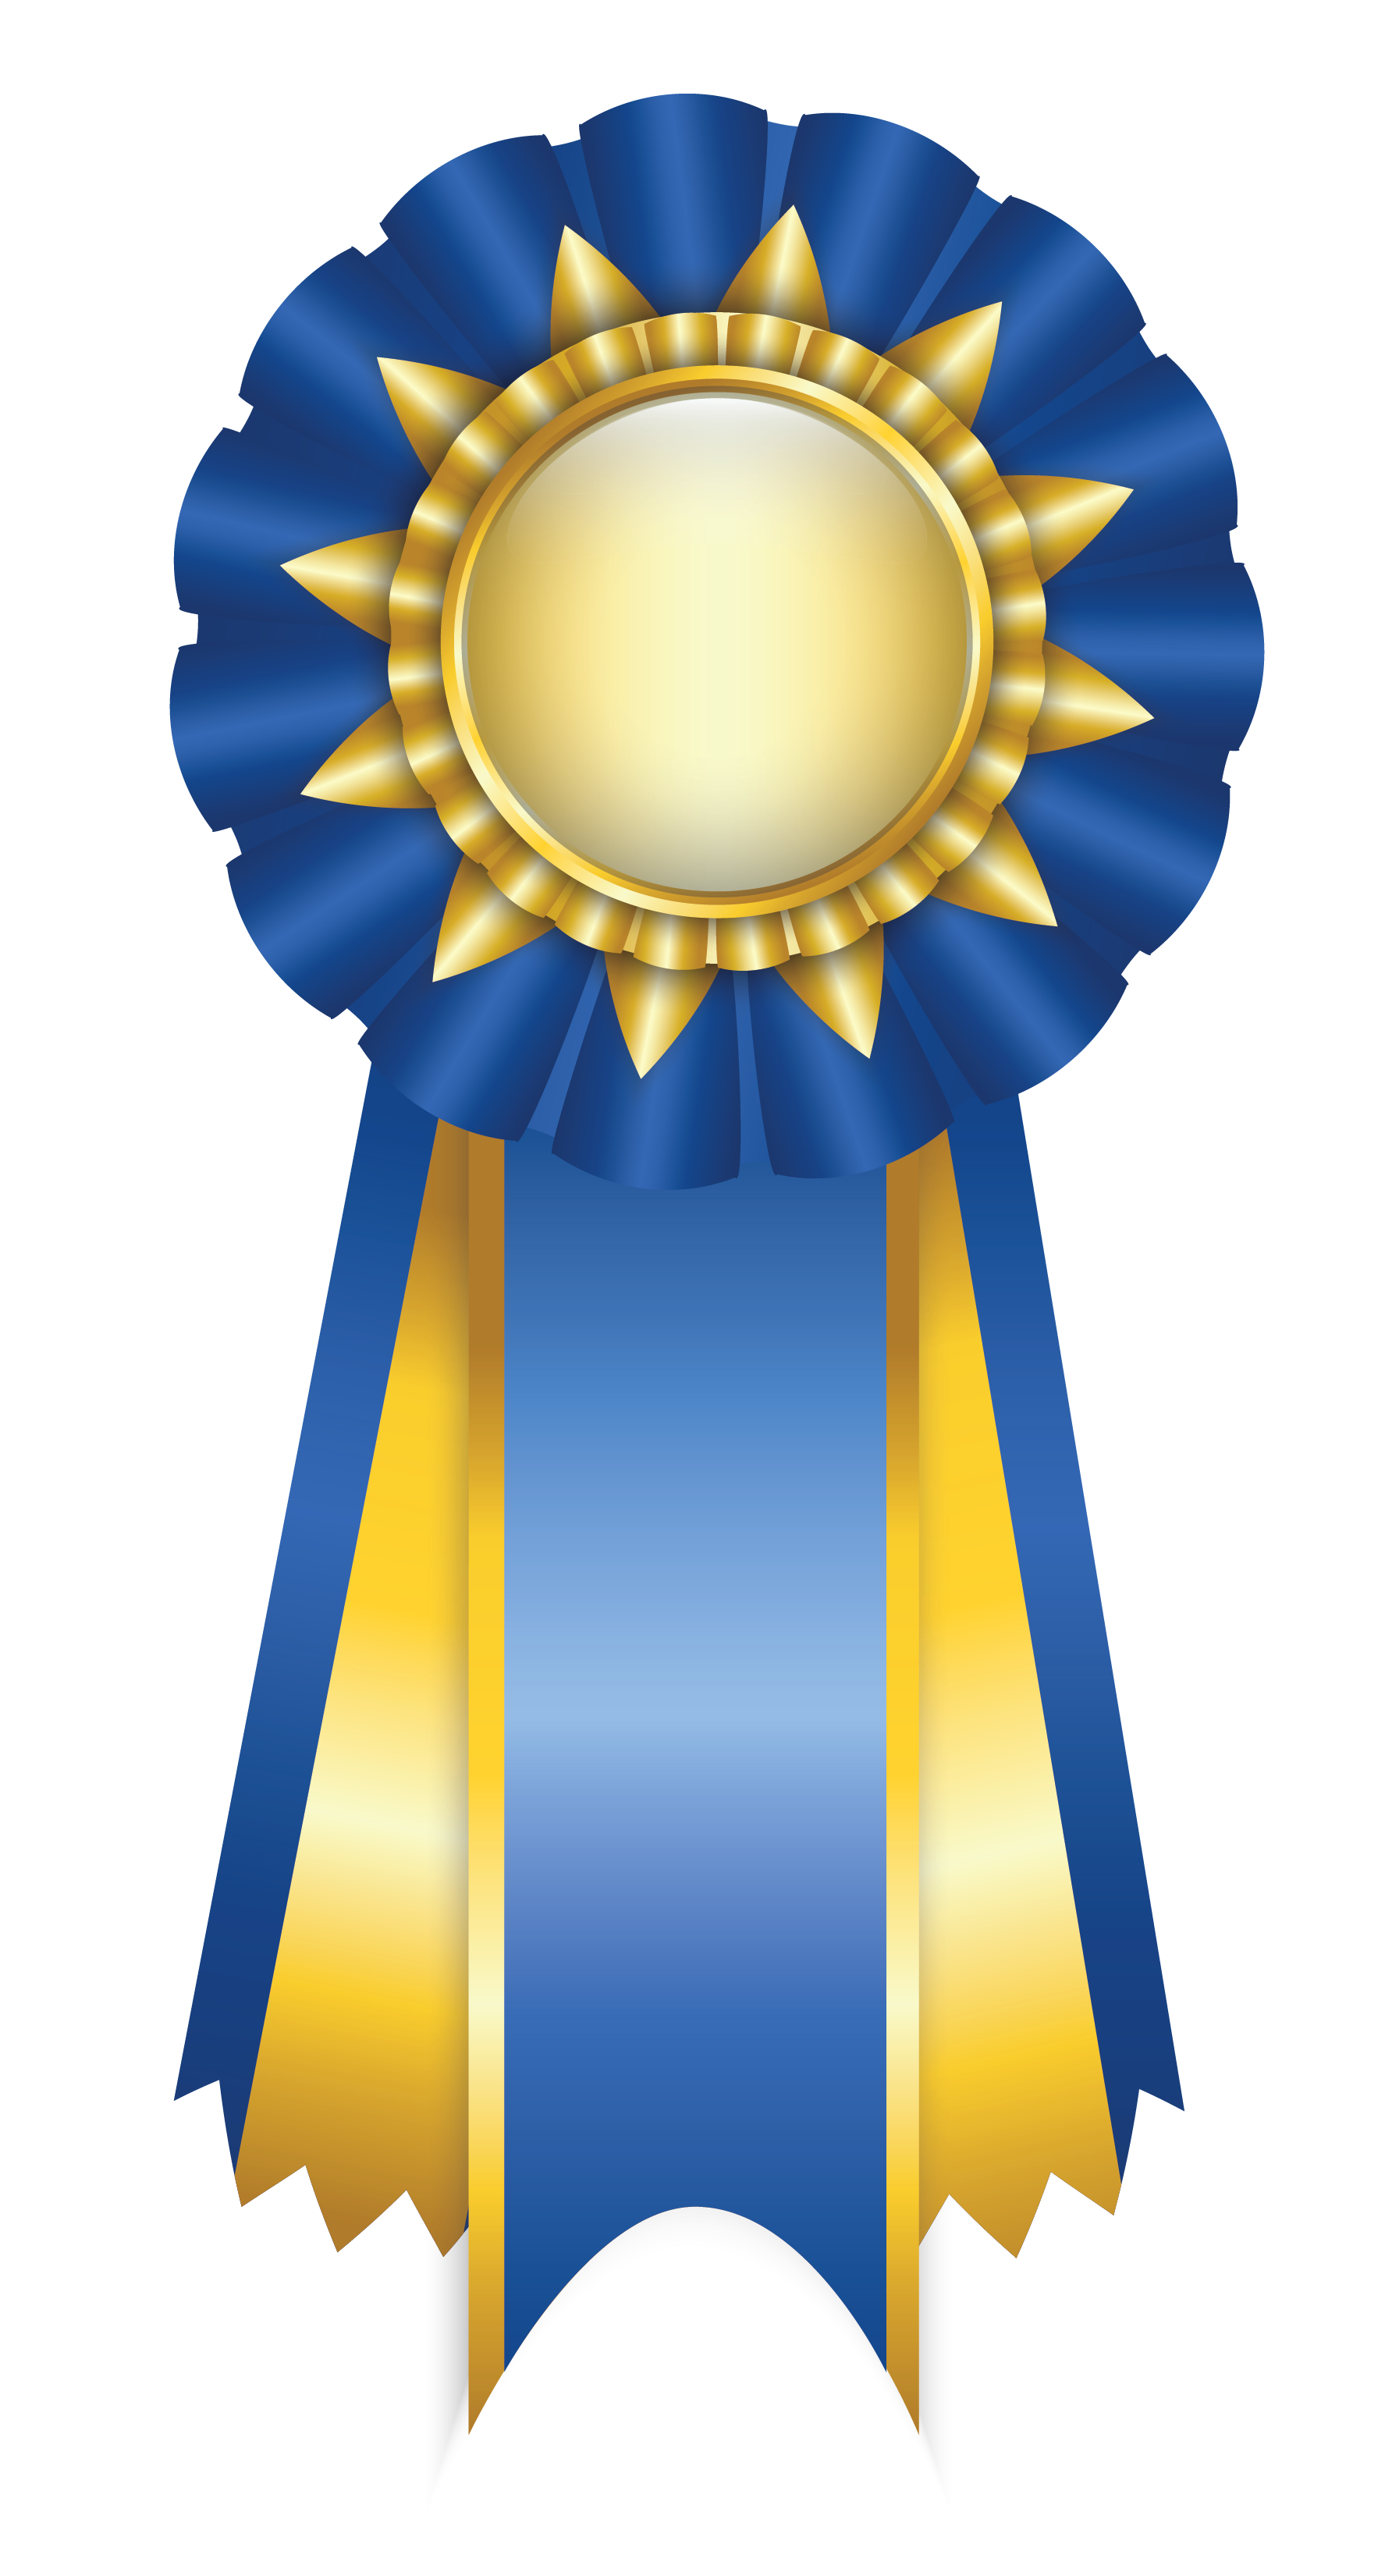 Awards clipart. Recognition station 